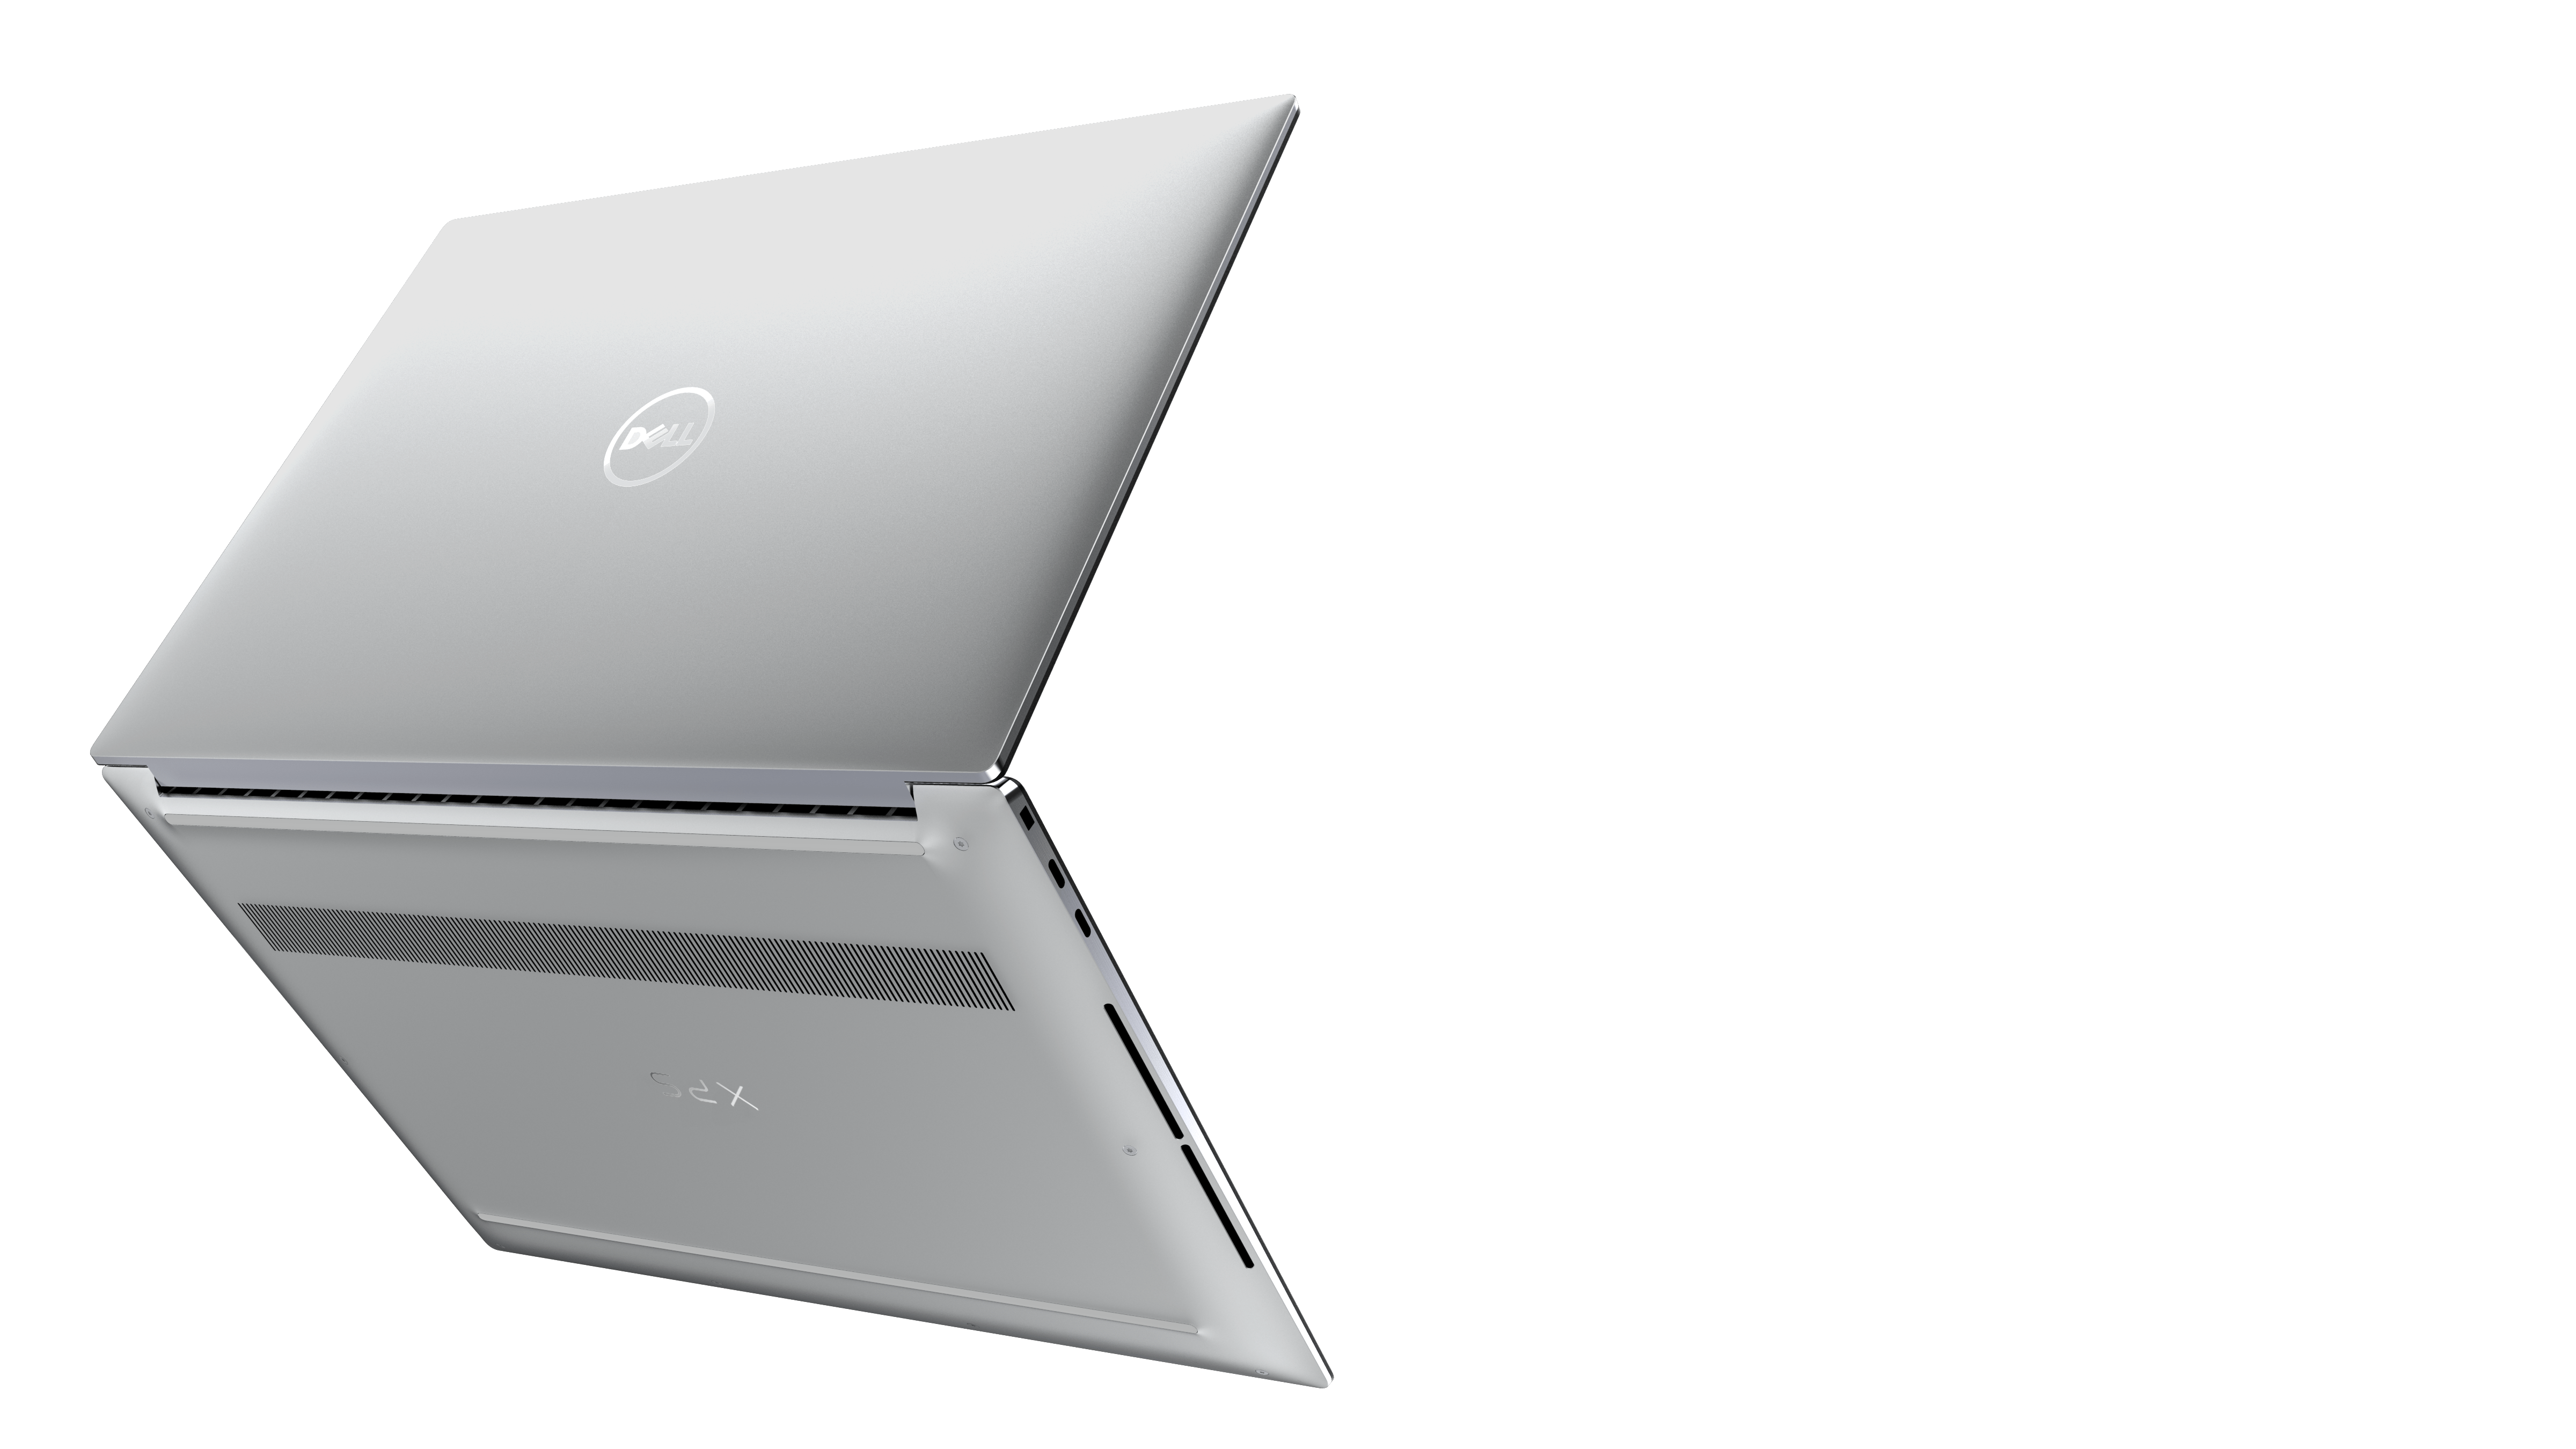 The New Dell Xps 15 Takes Powerful Mobile Computing Up A Notch